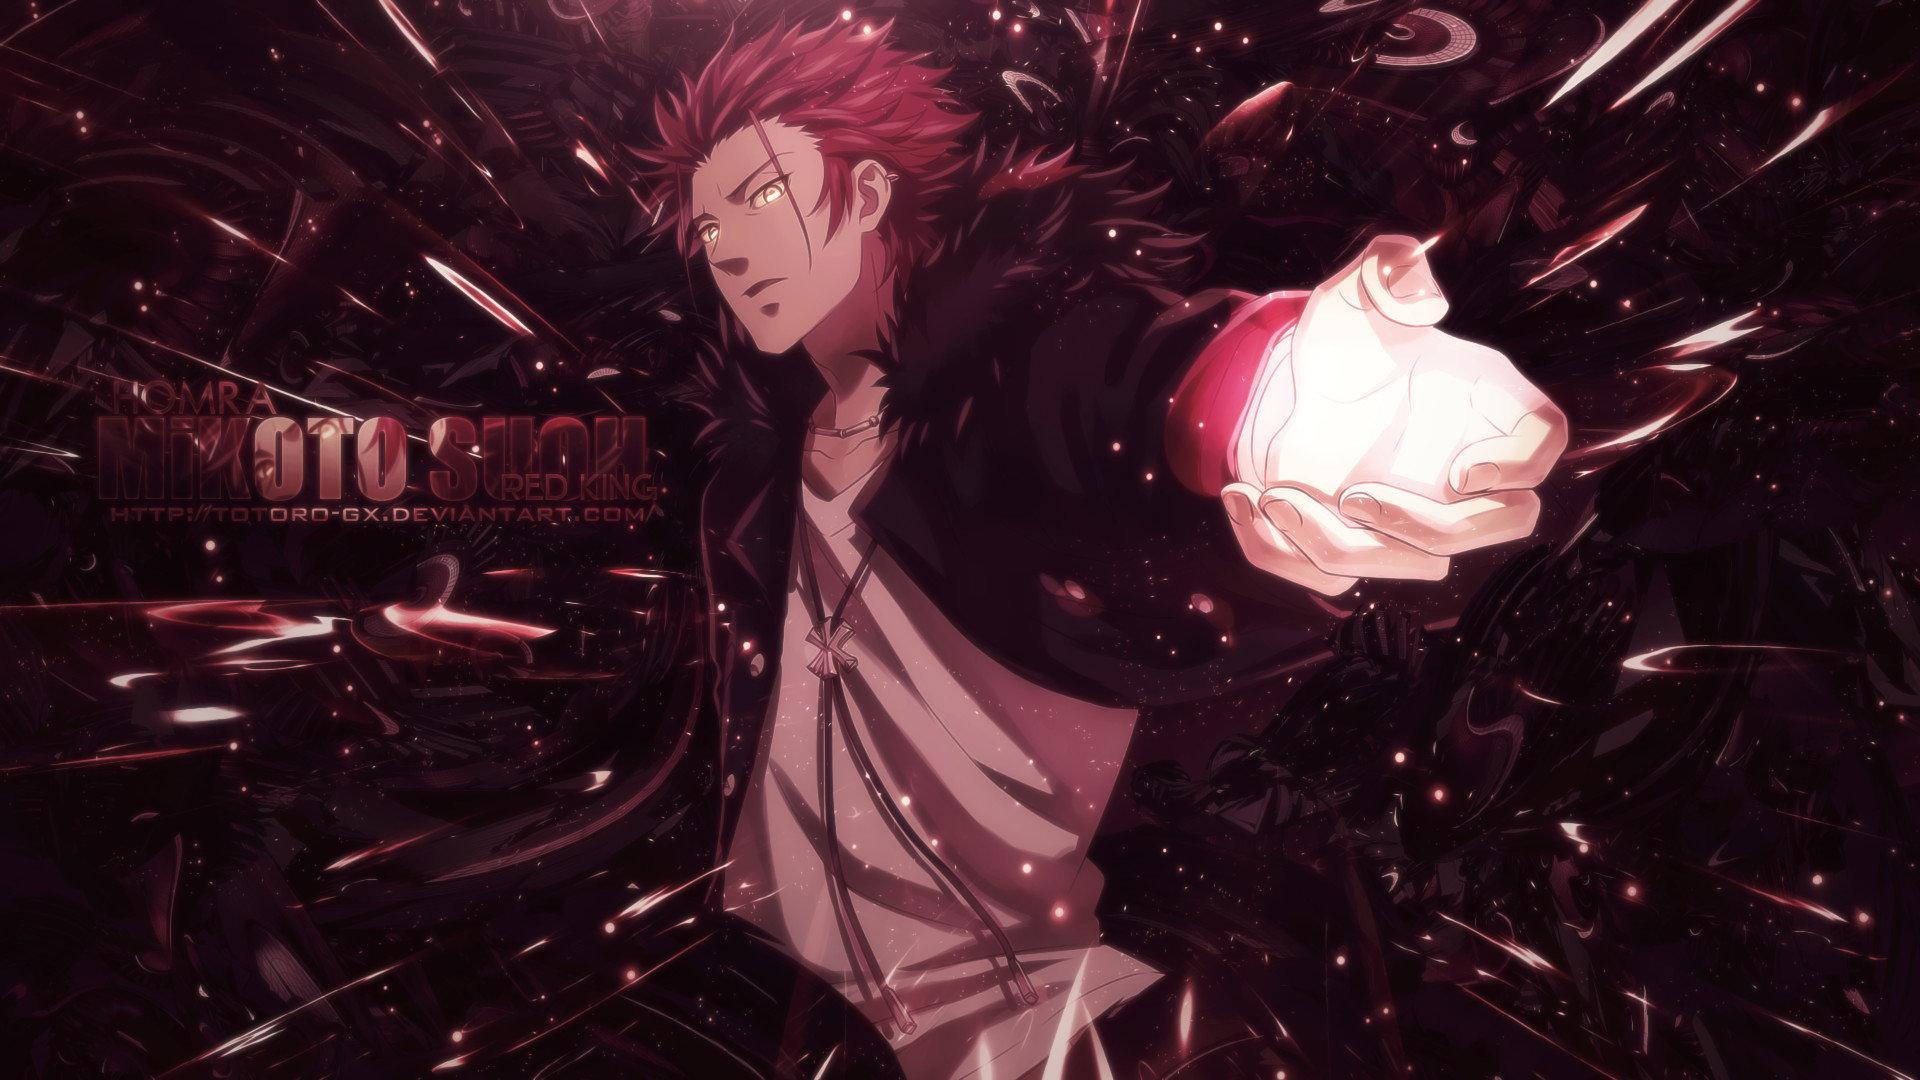 Best Mikoto Suoh wallpaper for High Resolution full HD